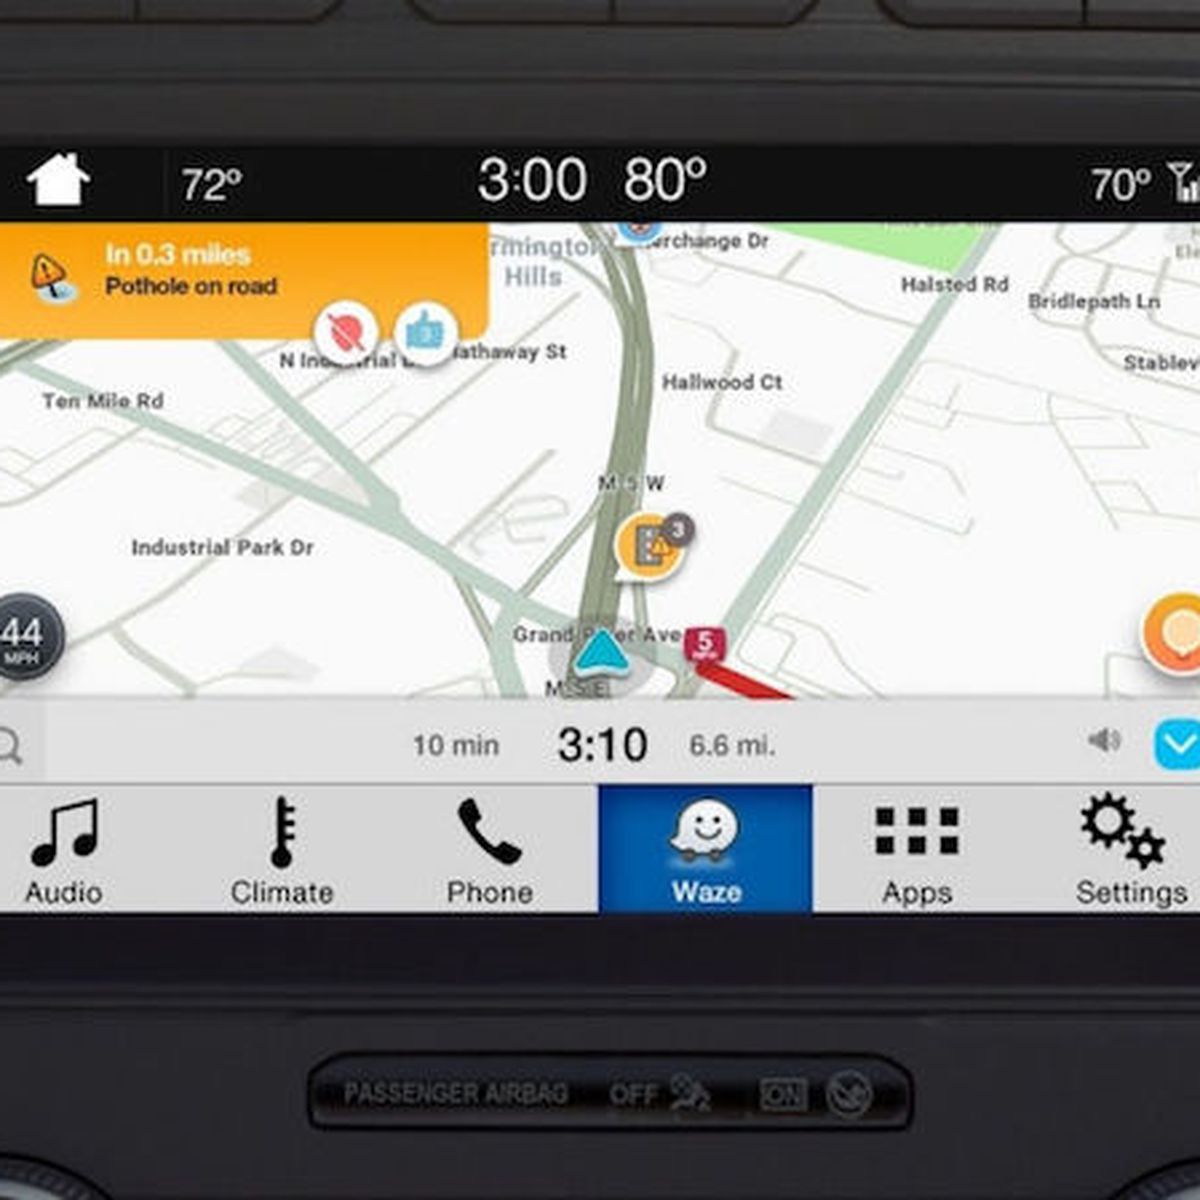 Waze Launches on Ford's SYNC 3 Infotainment Systems Through iOS - MacRumors